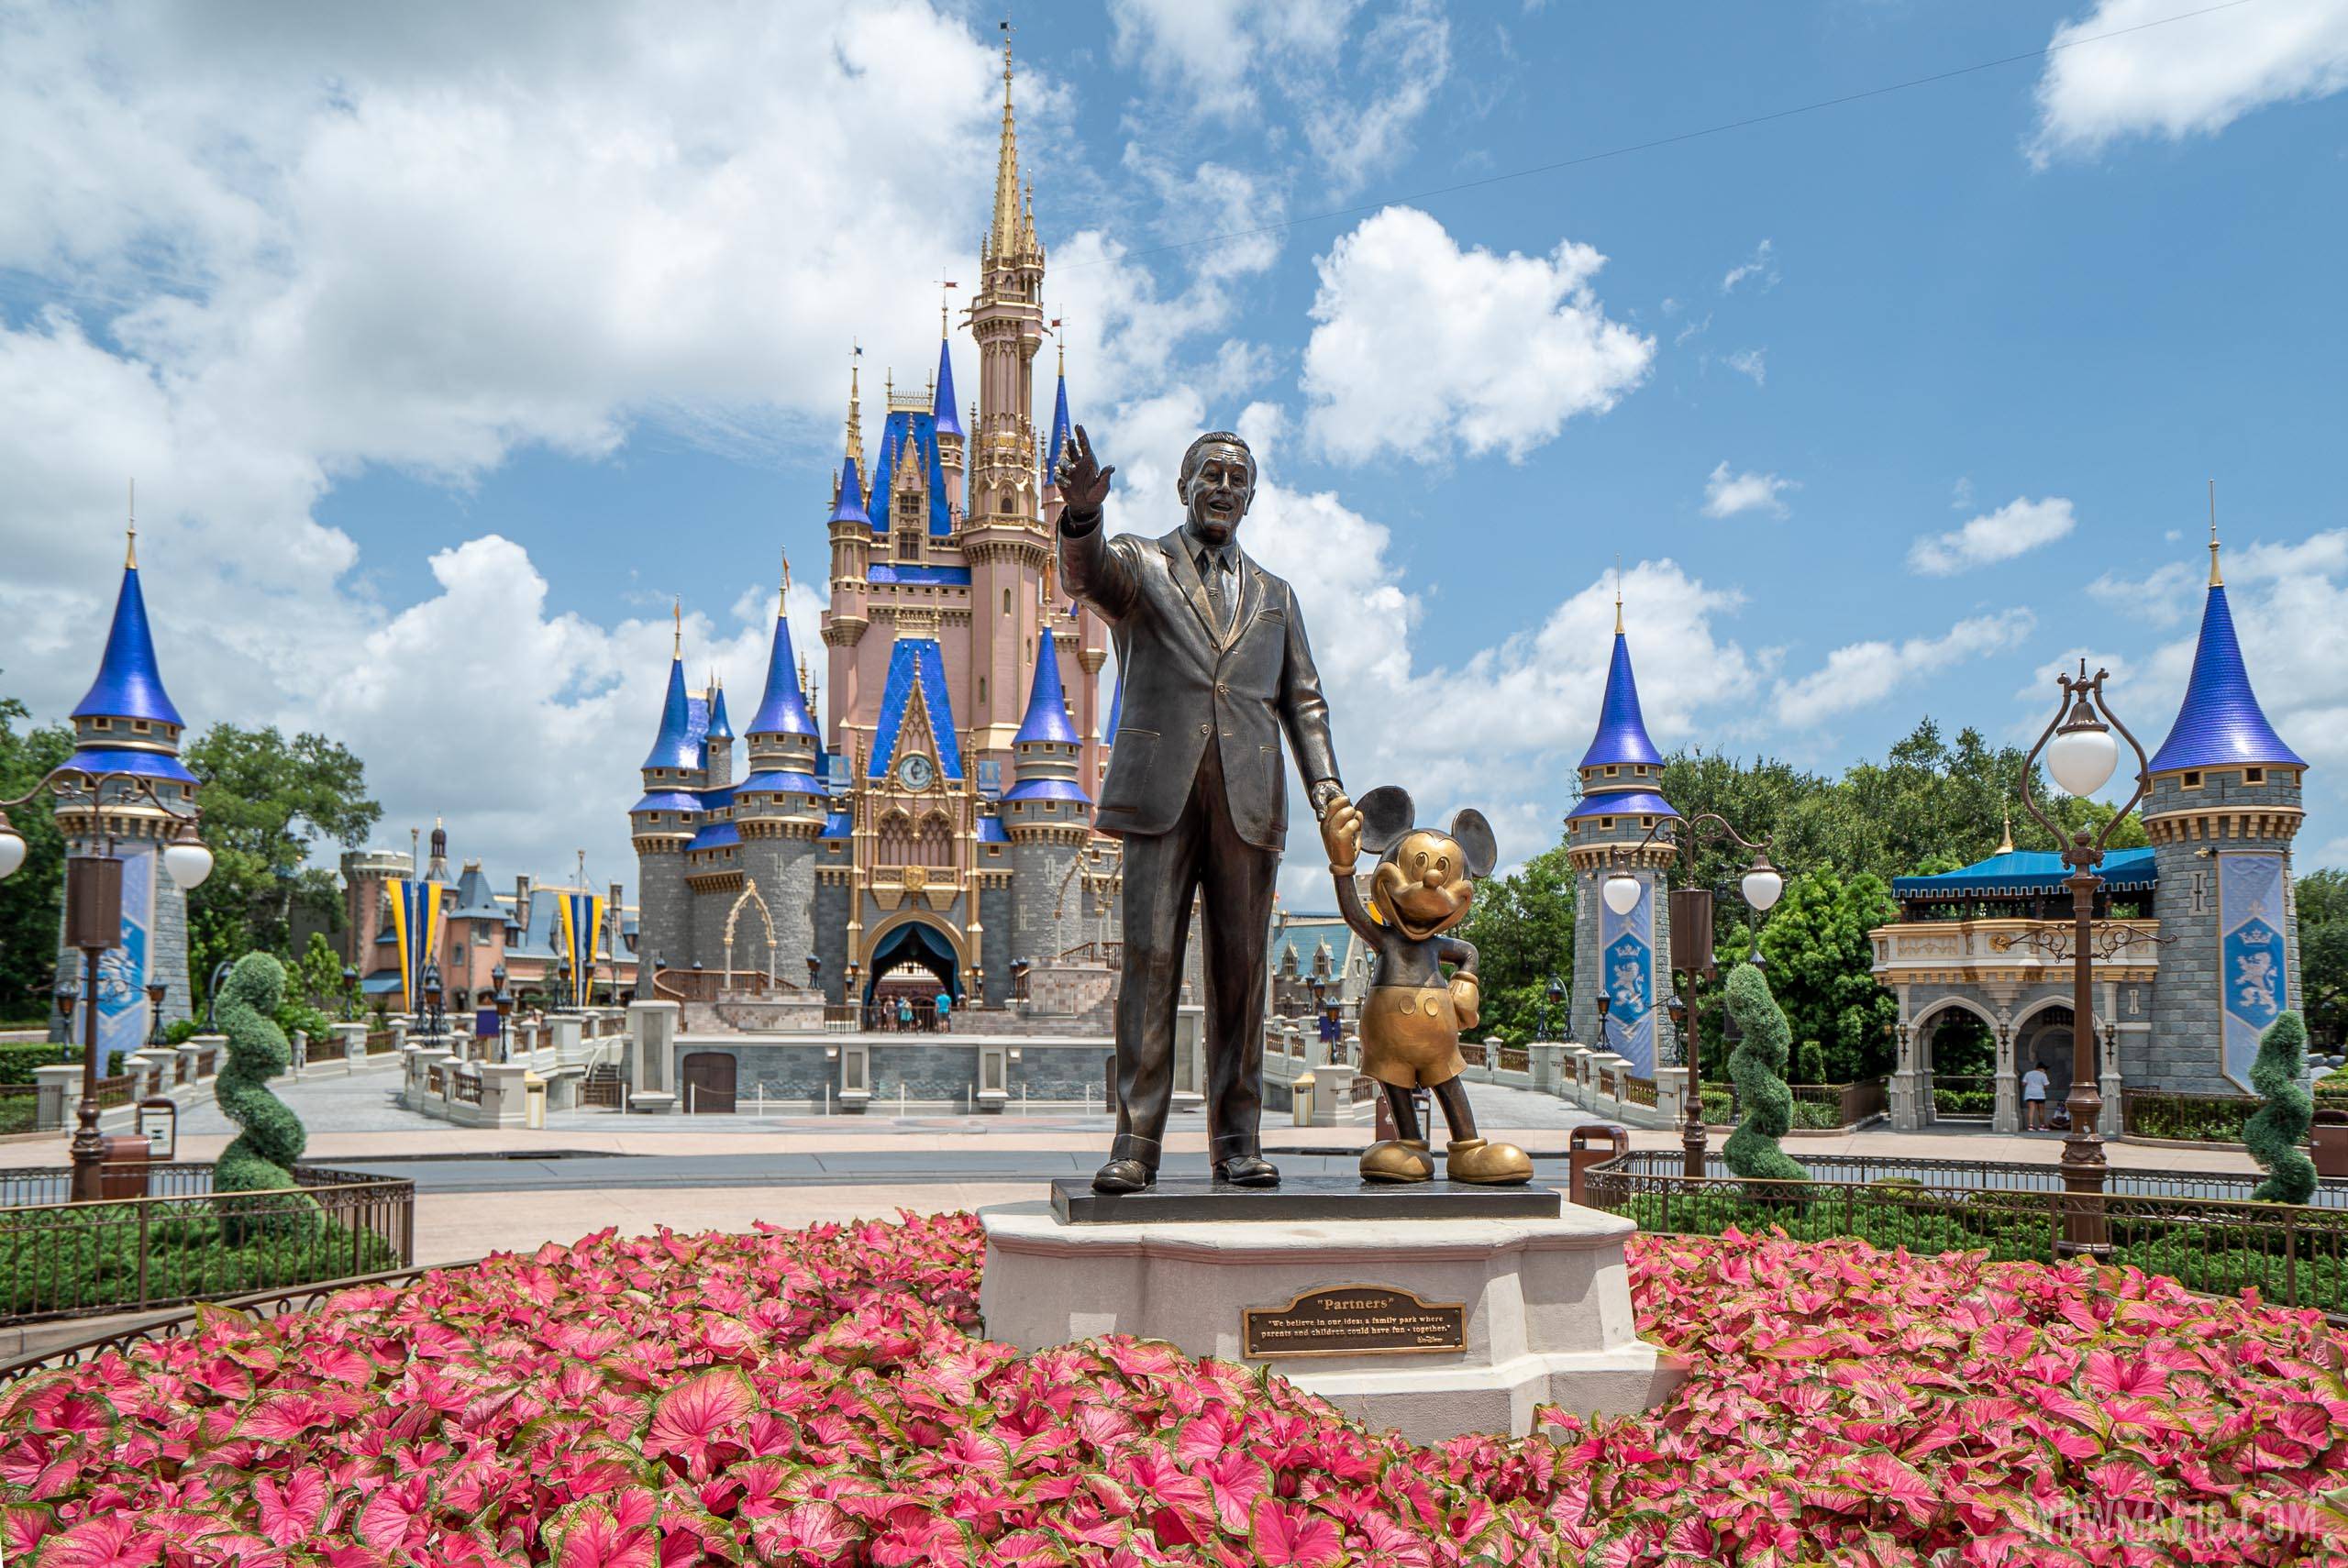 Magic Kingdom closed to some guests due to reaching capacity